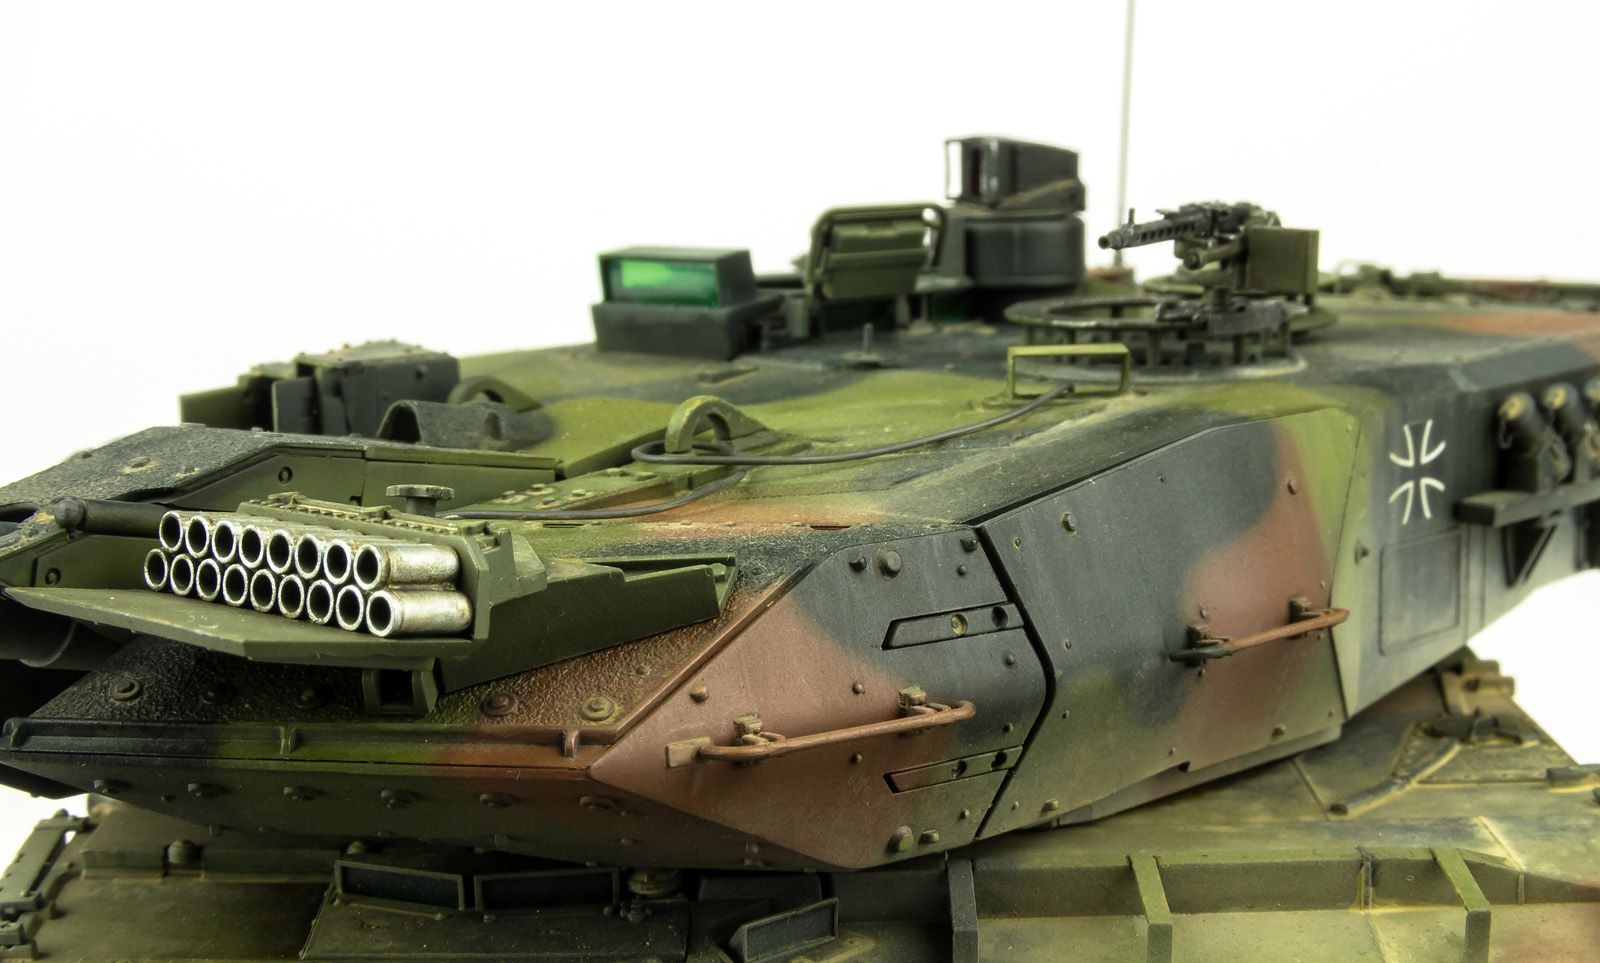 Tank Papercraft the Modelling News Done and "dusted" andy Finishes Meng S 35th